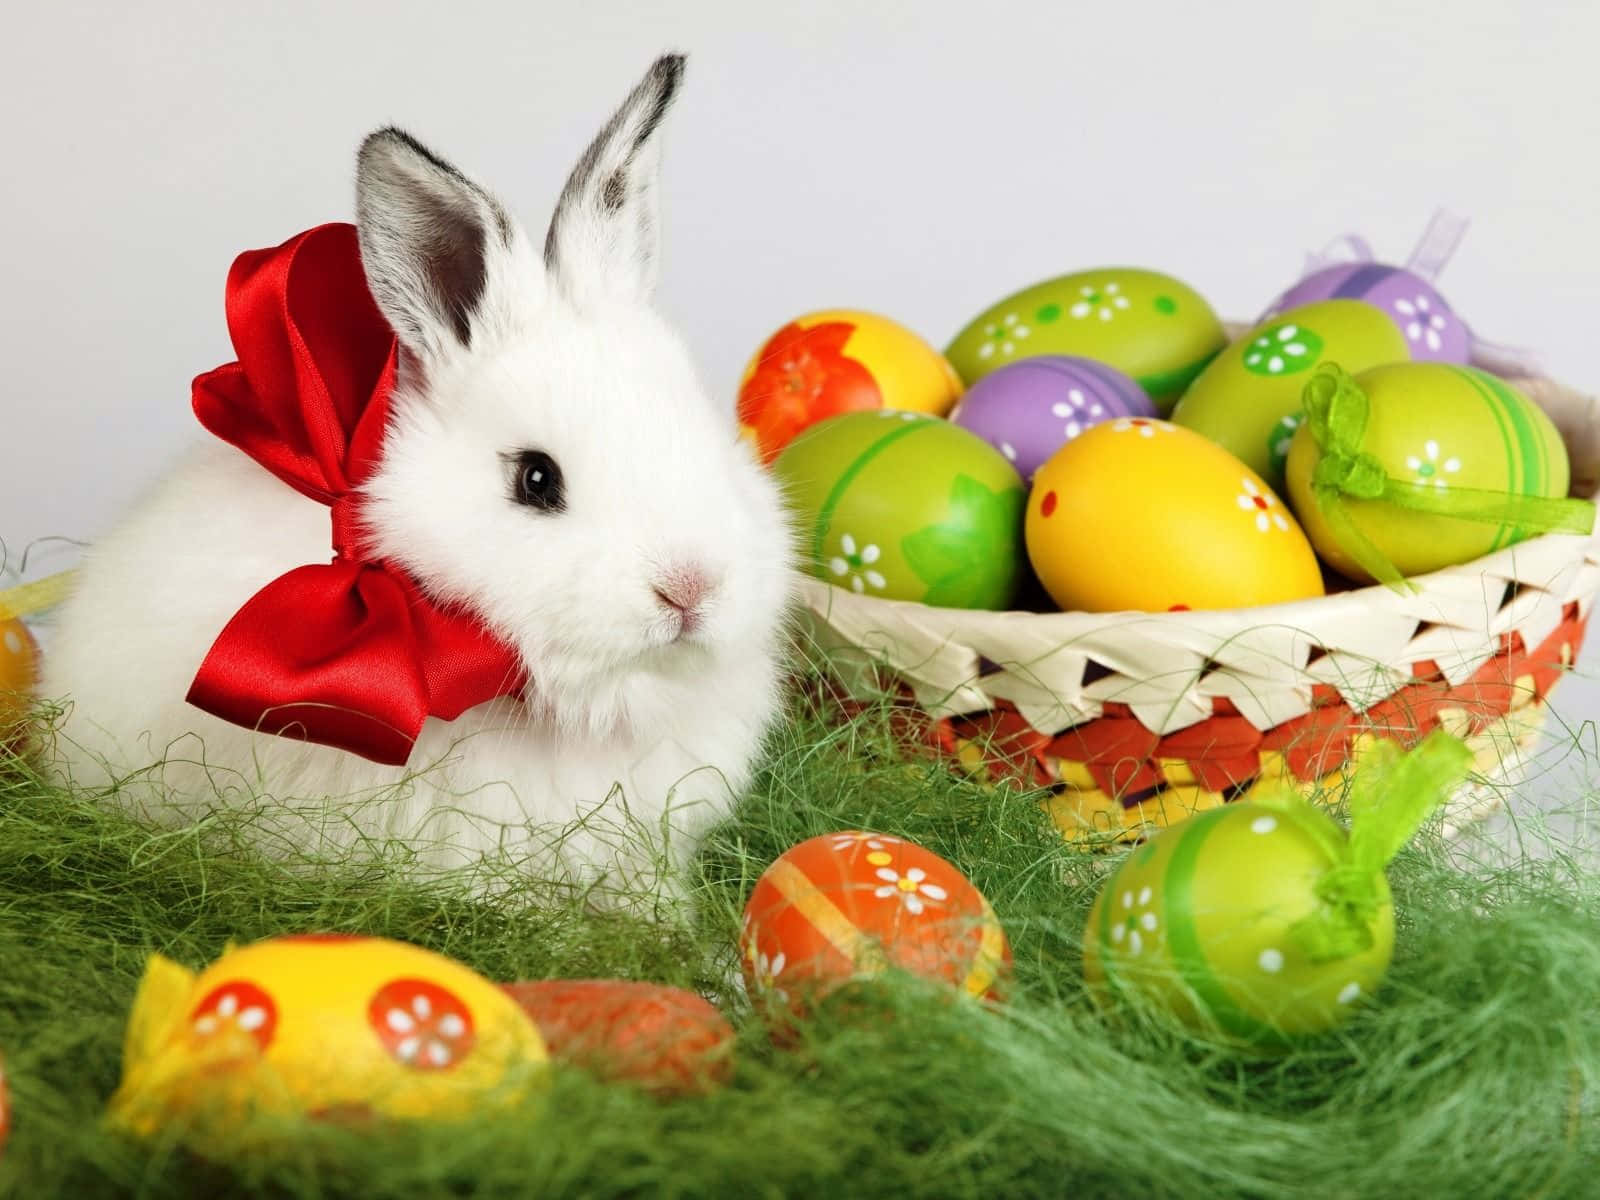 Celebrate Easter with the Easter Bunny!